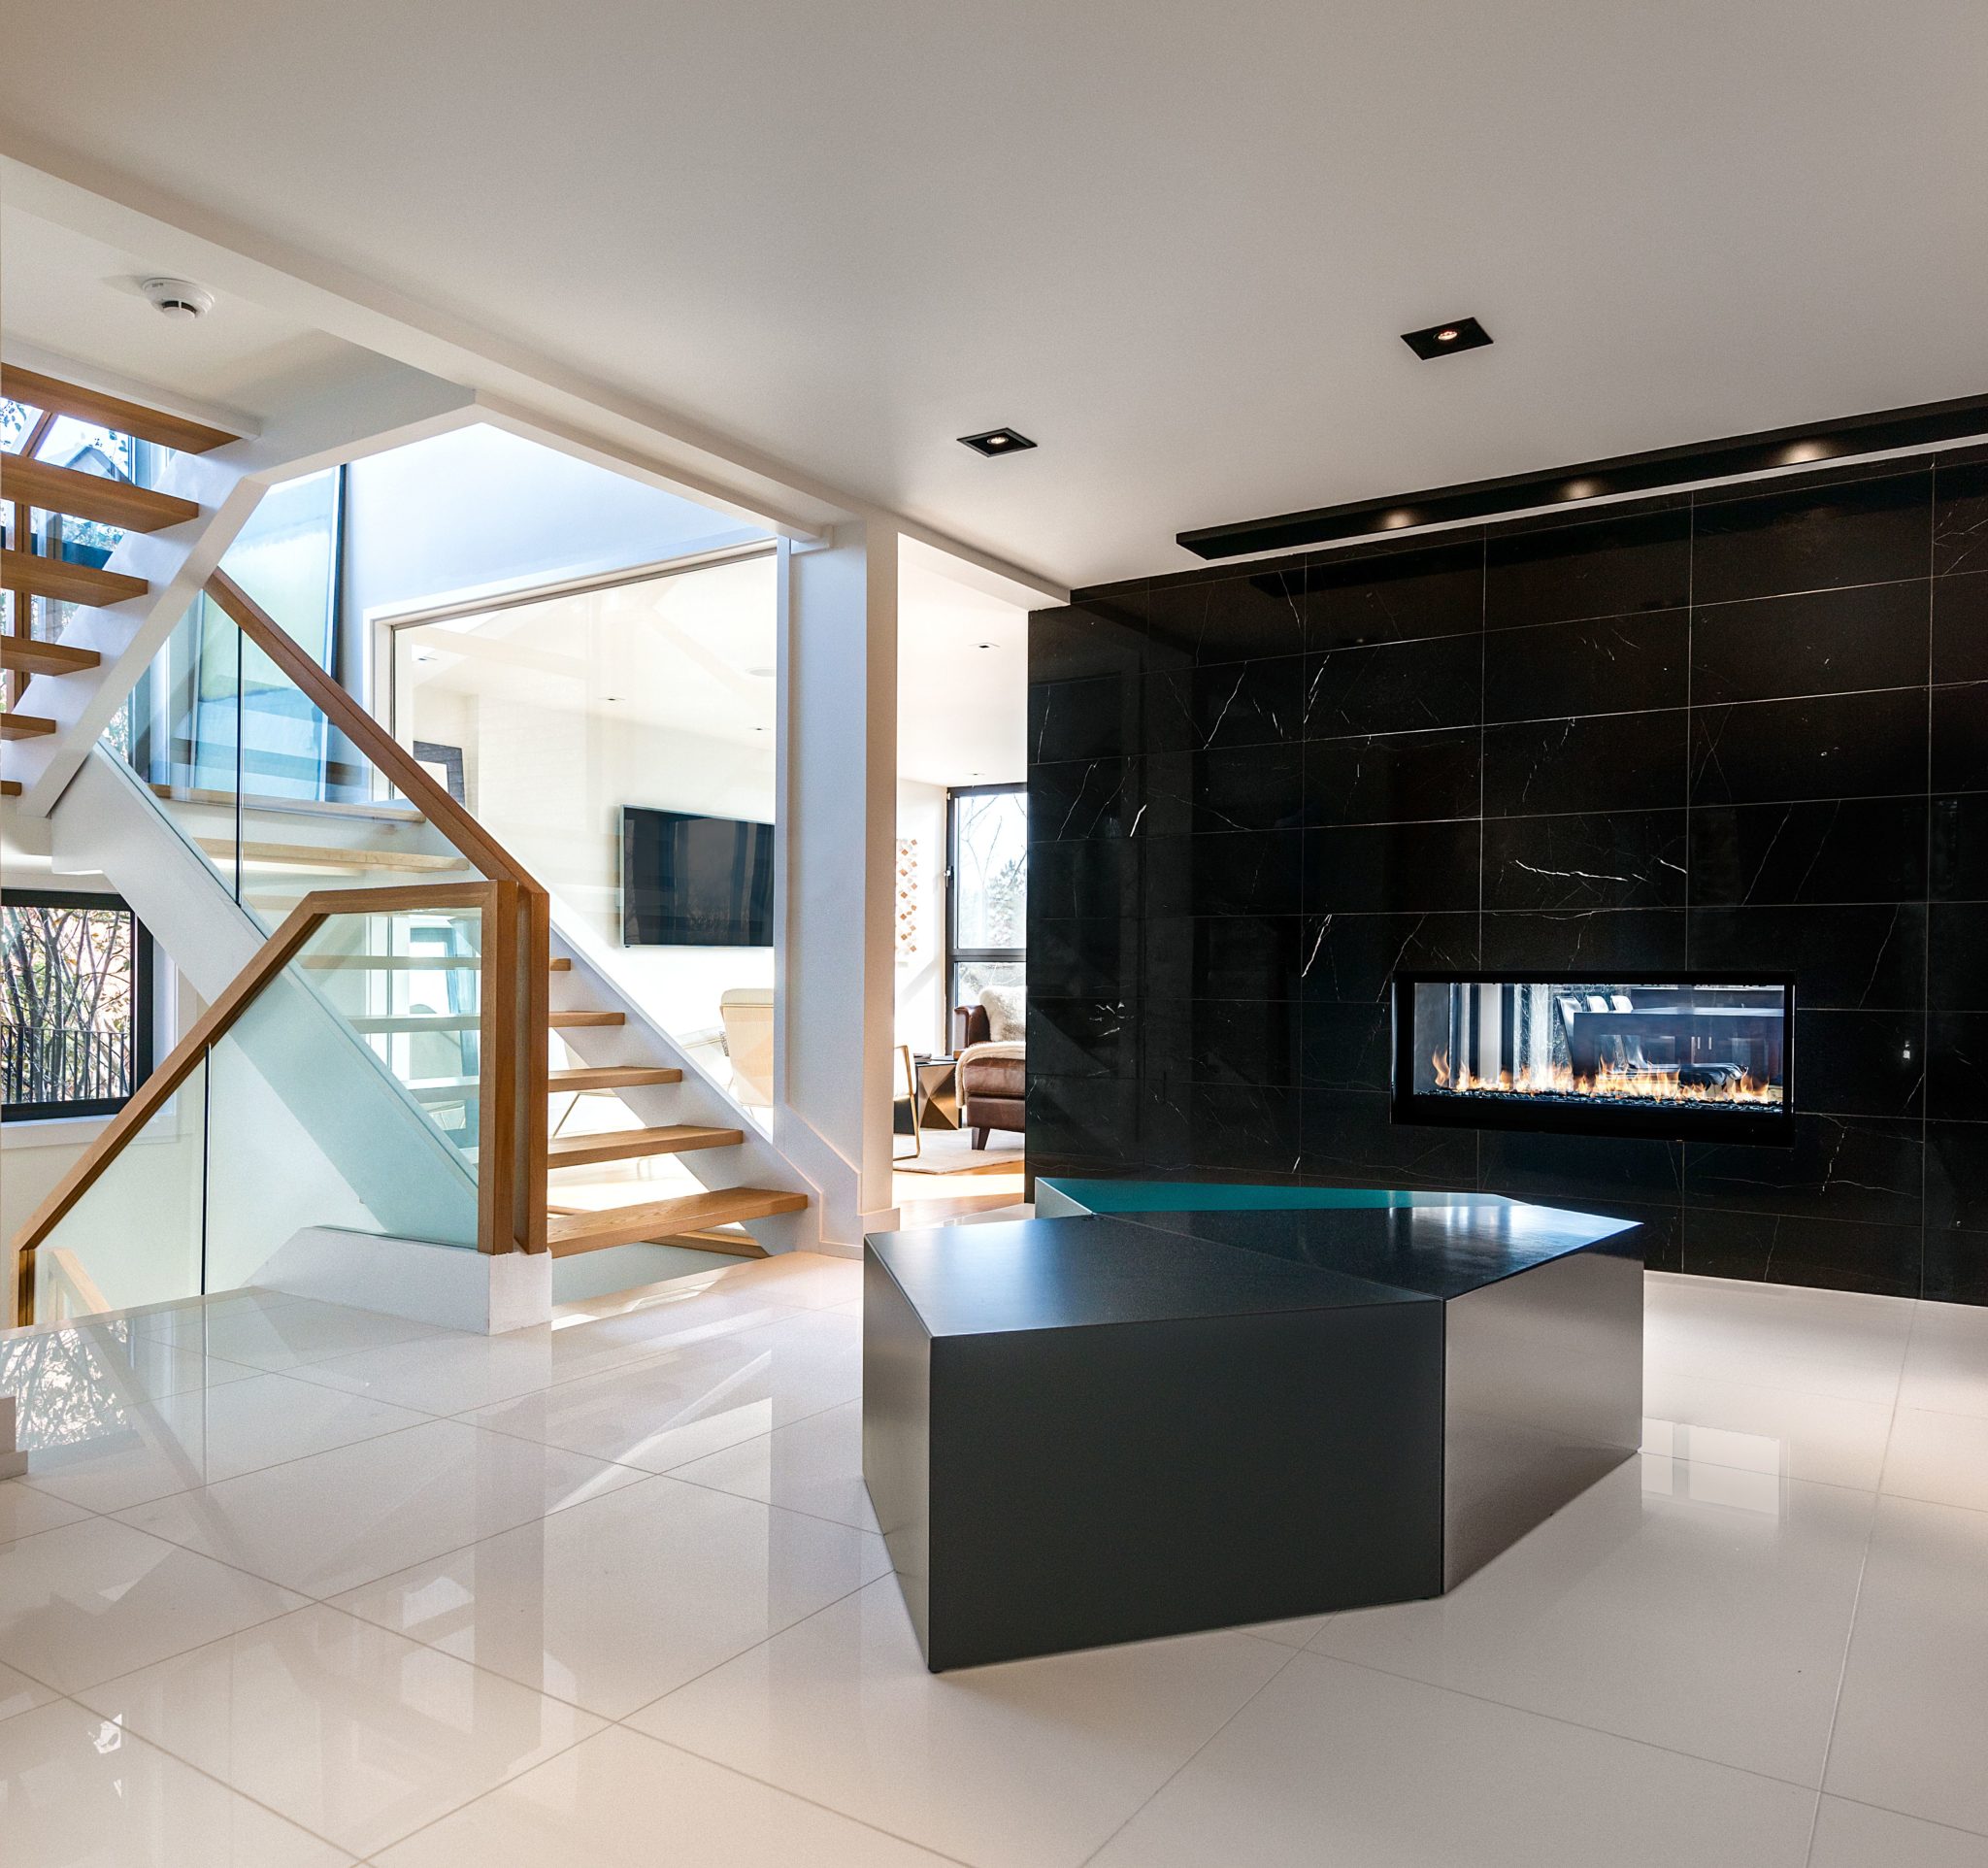 The large entrance foyer of a custom built home with beautiful black marble fireplace and glass staircase designed by FrankFranco Architects on their Deja View Project. Are you building a custom home? Connect with us today.